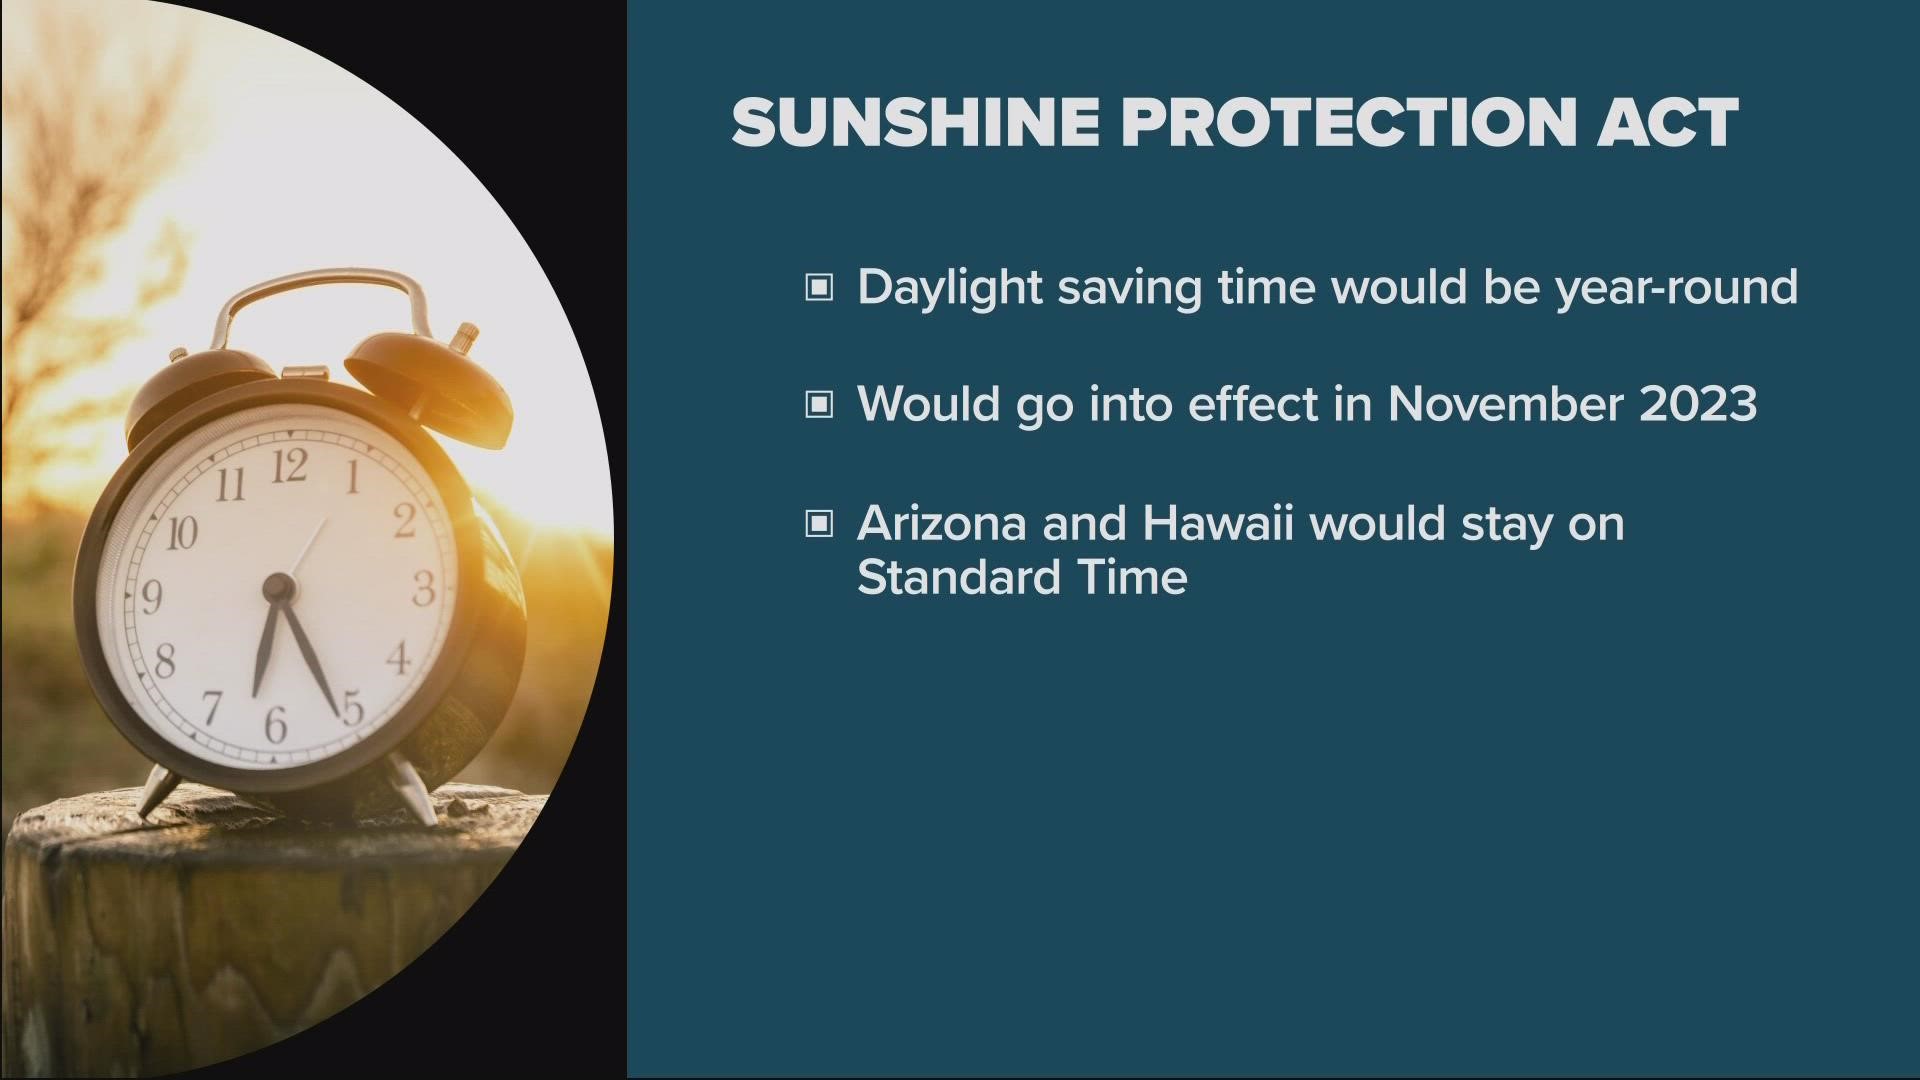 Fall back: Daylight saving time ends this weekend for most of US